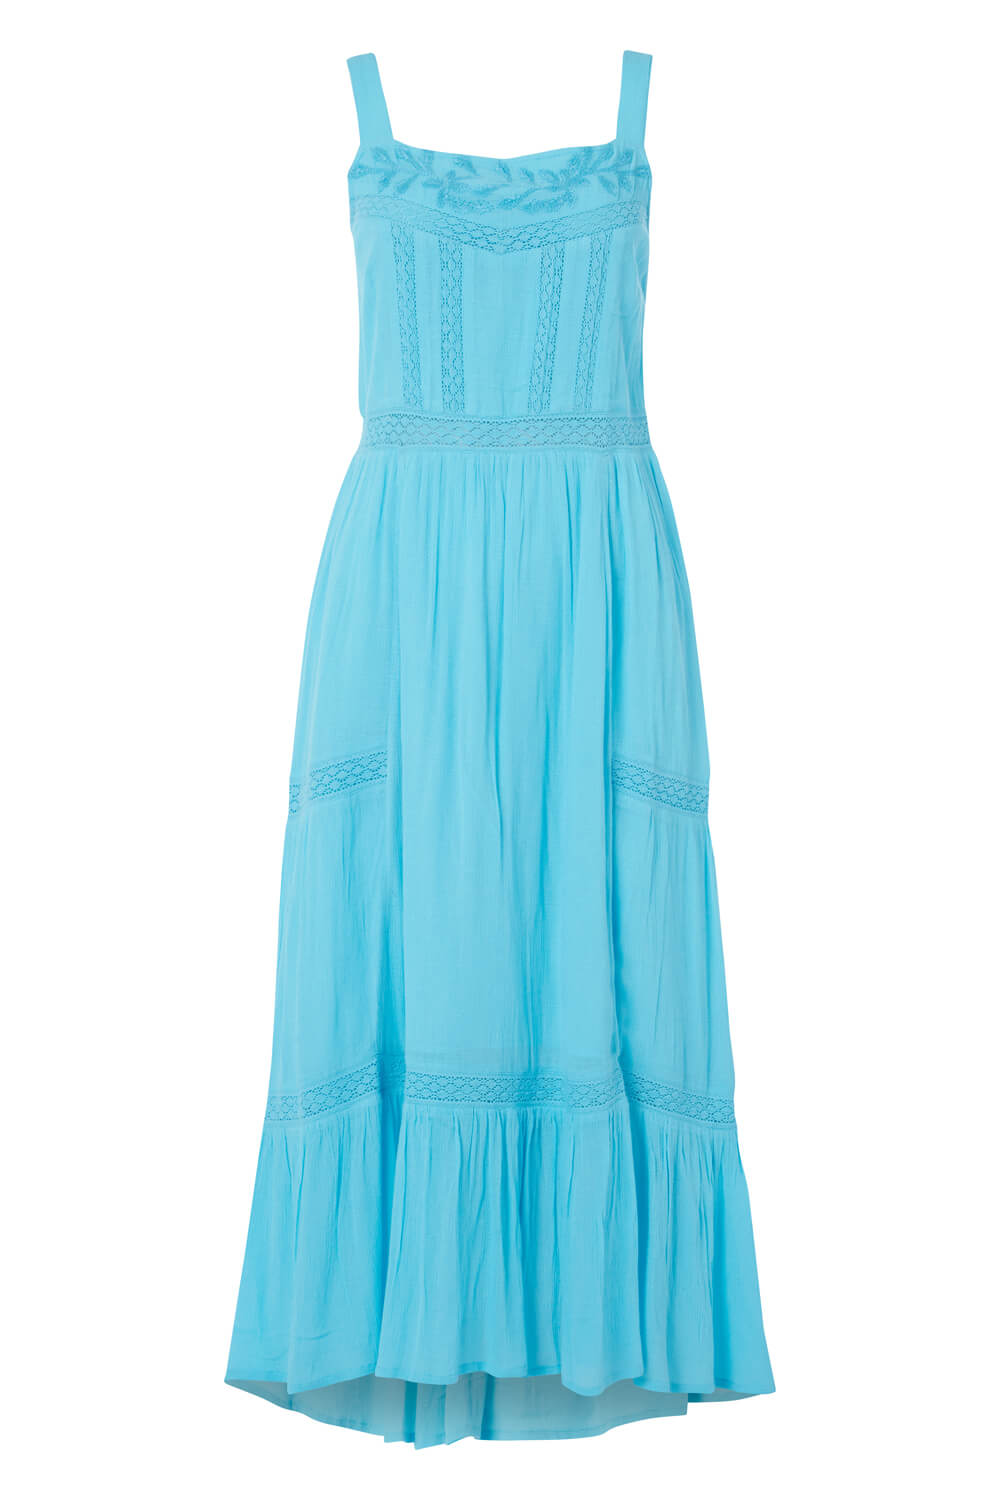 Turquoise Ladder Lace Tiered Maxi Dress, Image 4 of 4